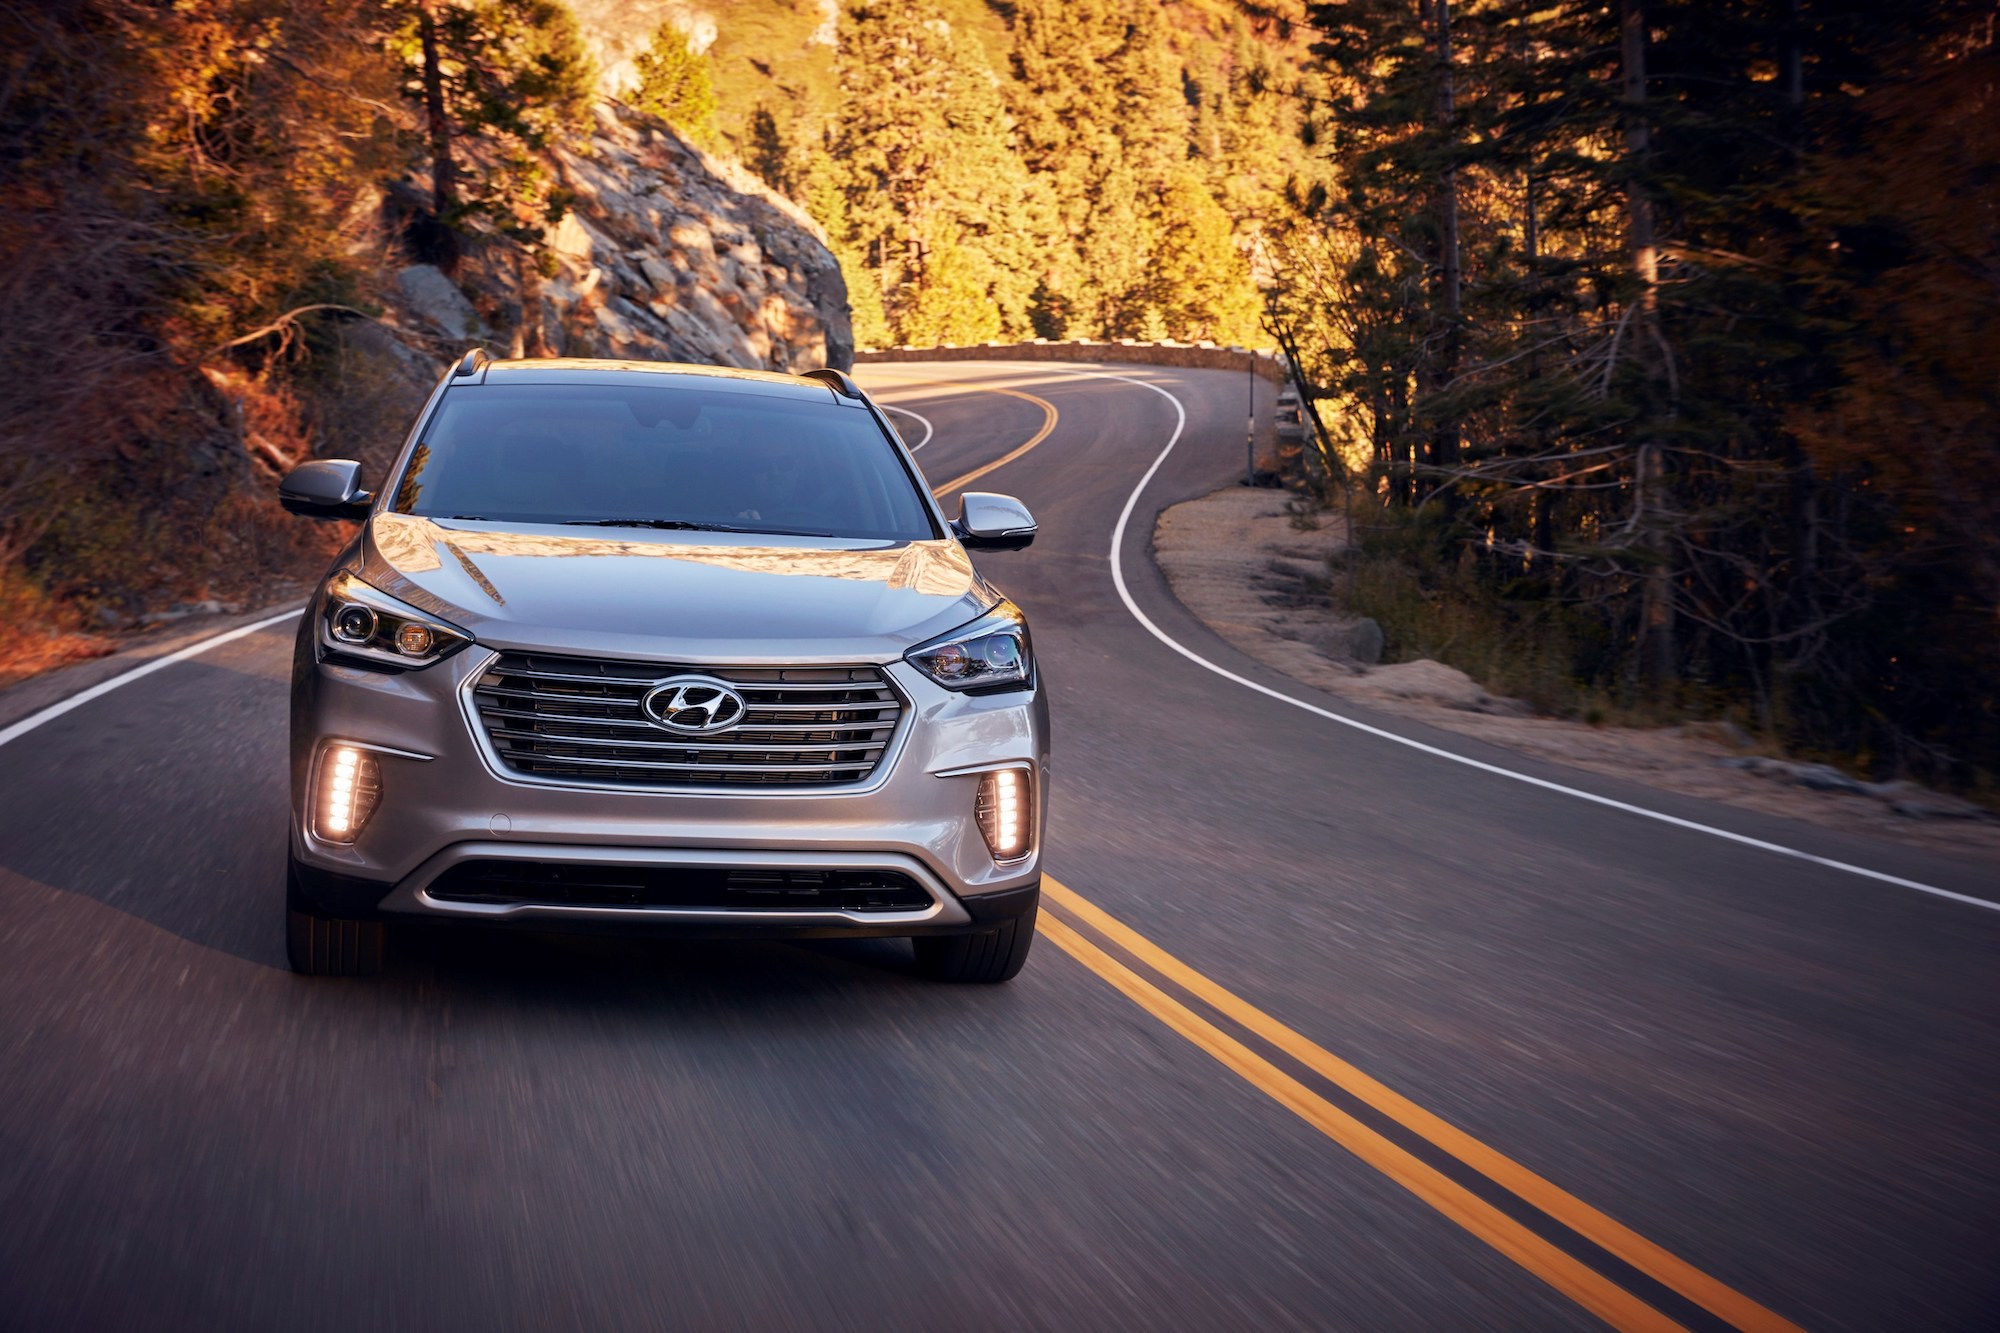 A silver 2018 Hyundai Santa Fe travels on a curvy two-lane mountain highway flanked by pine trees